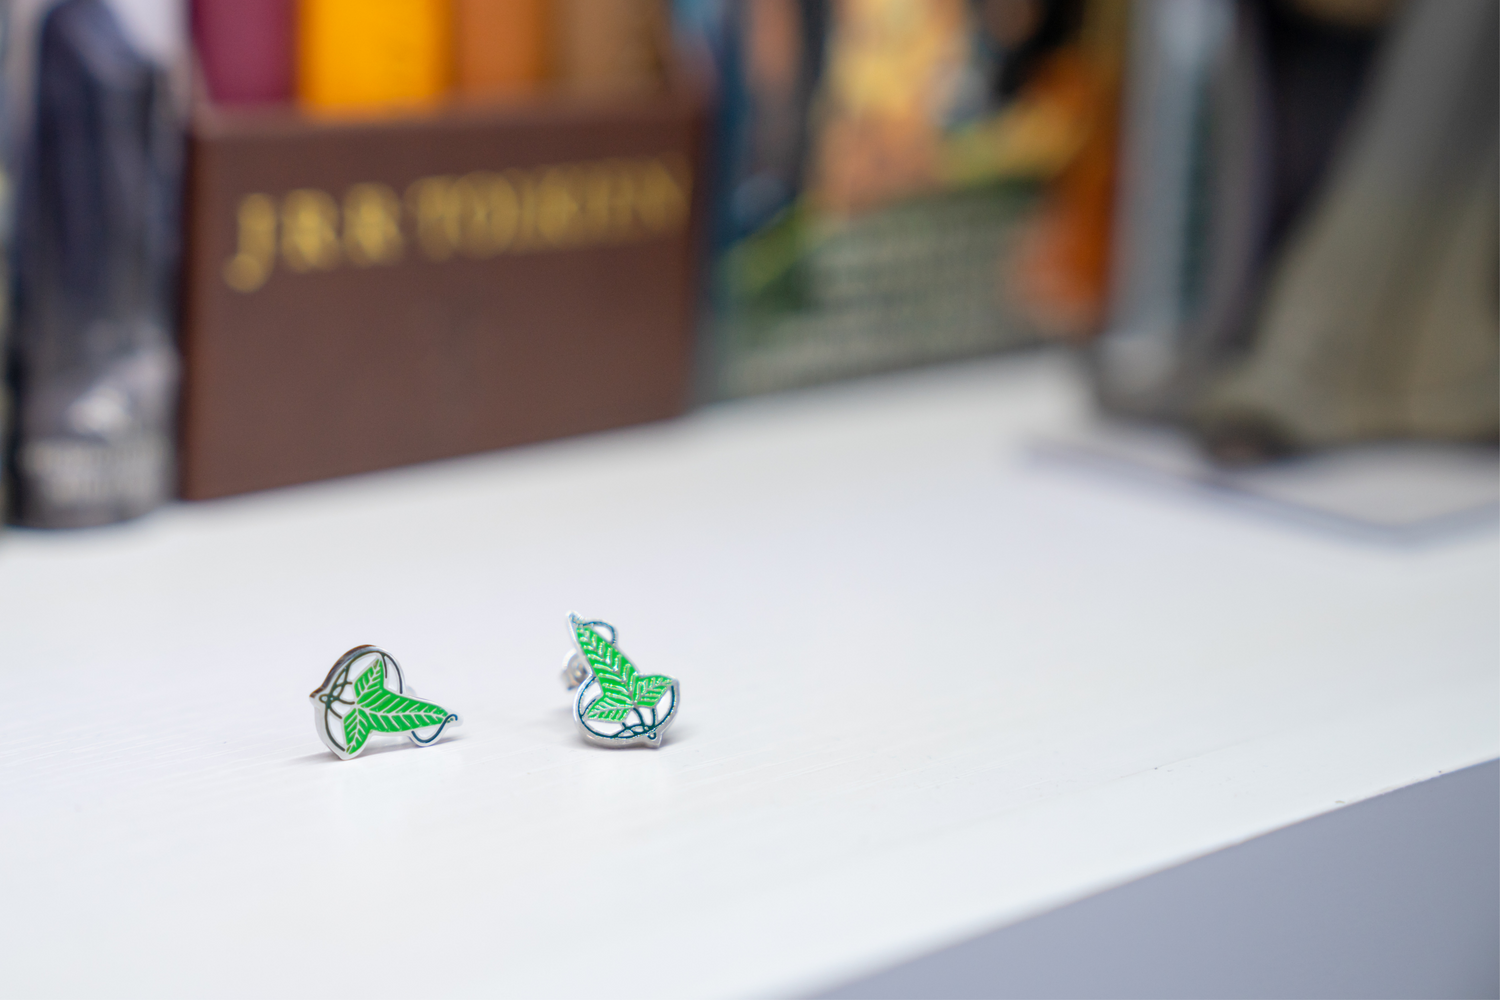 A pair of green earrings on a white bookshelf with several Lord of the Rings books in the background